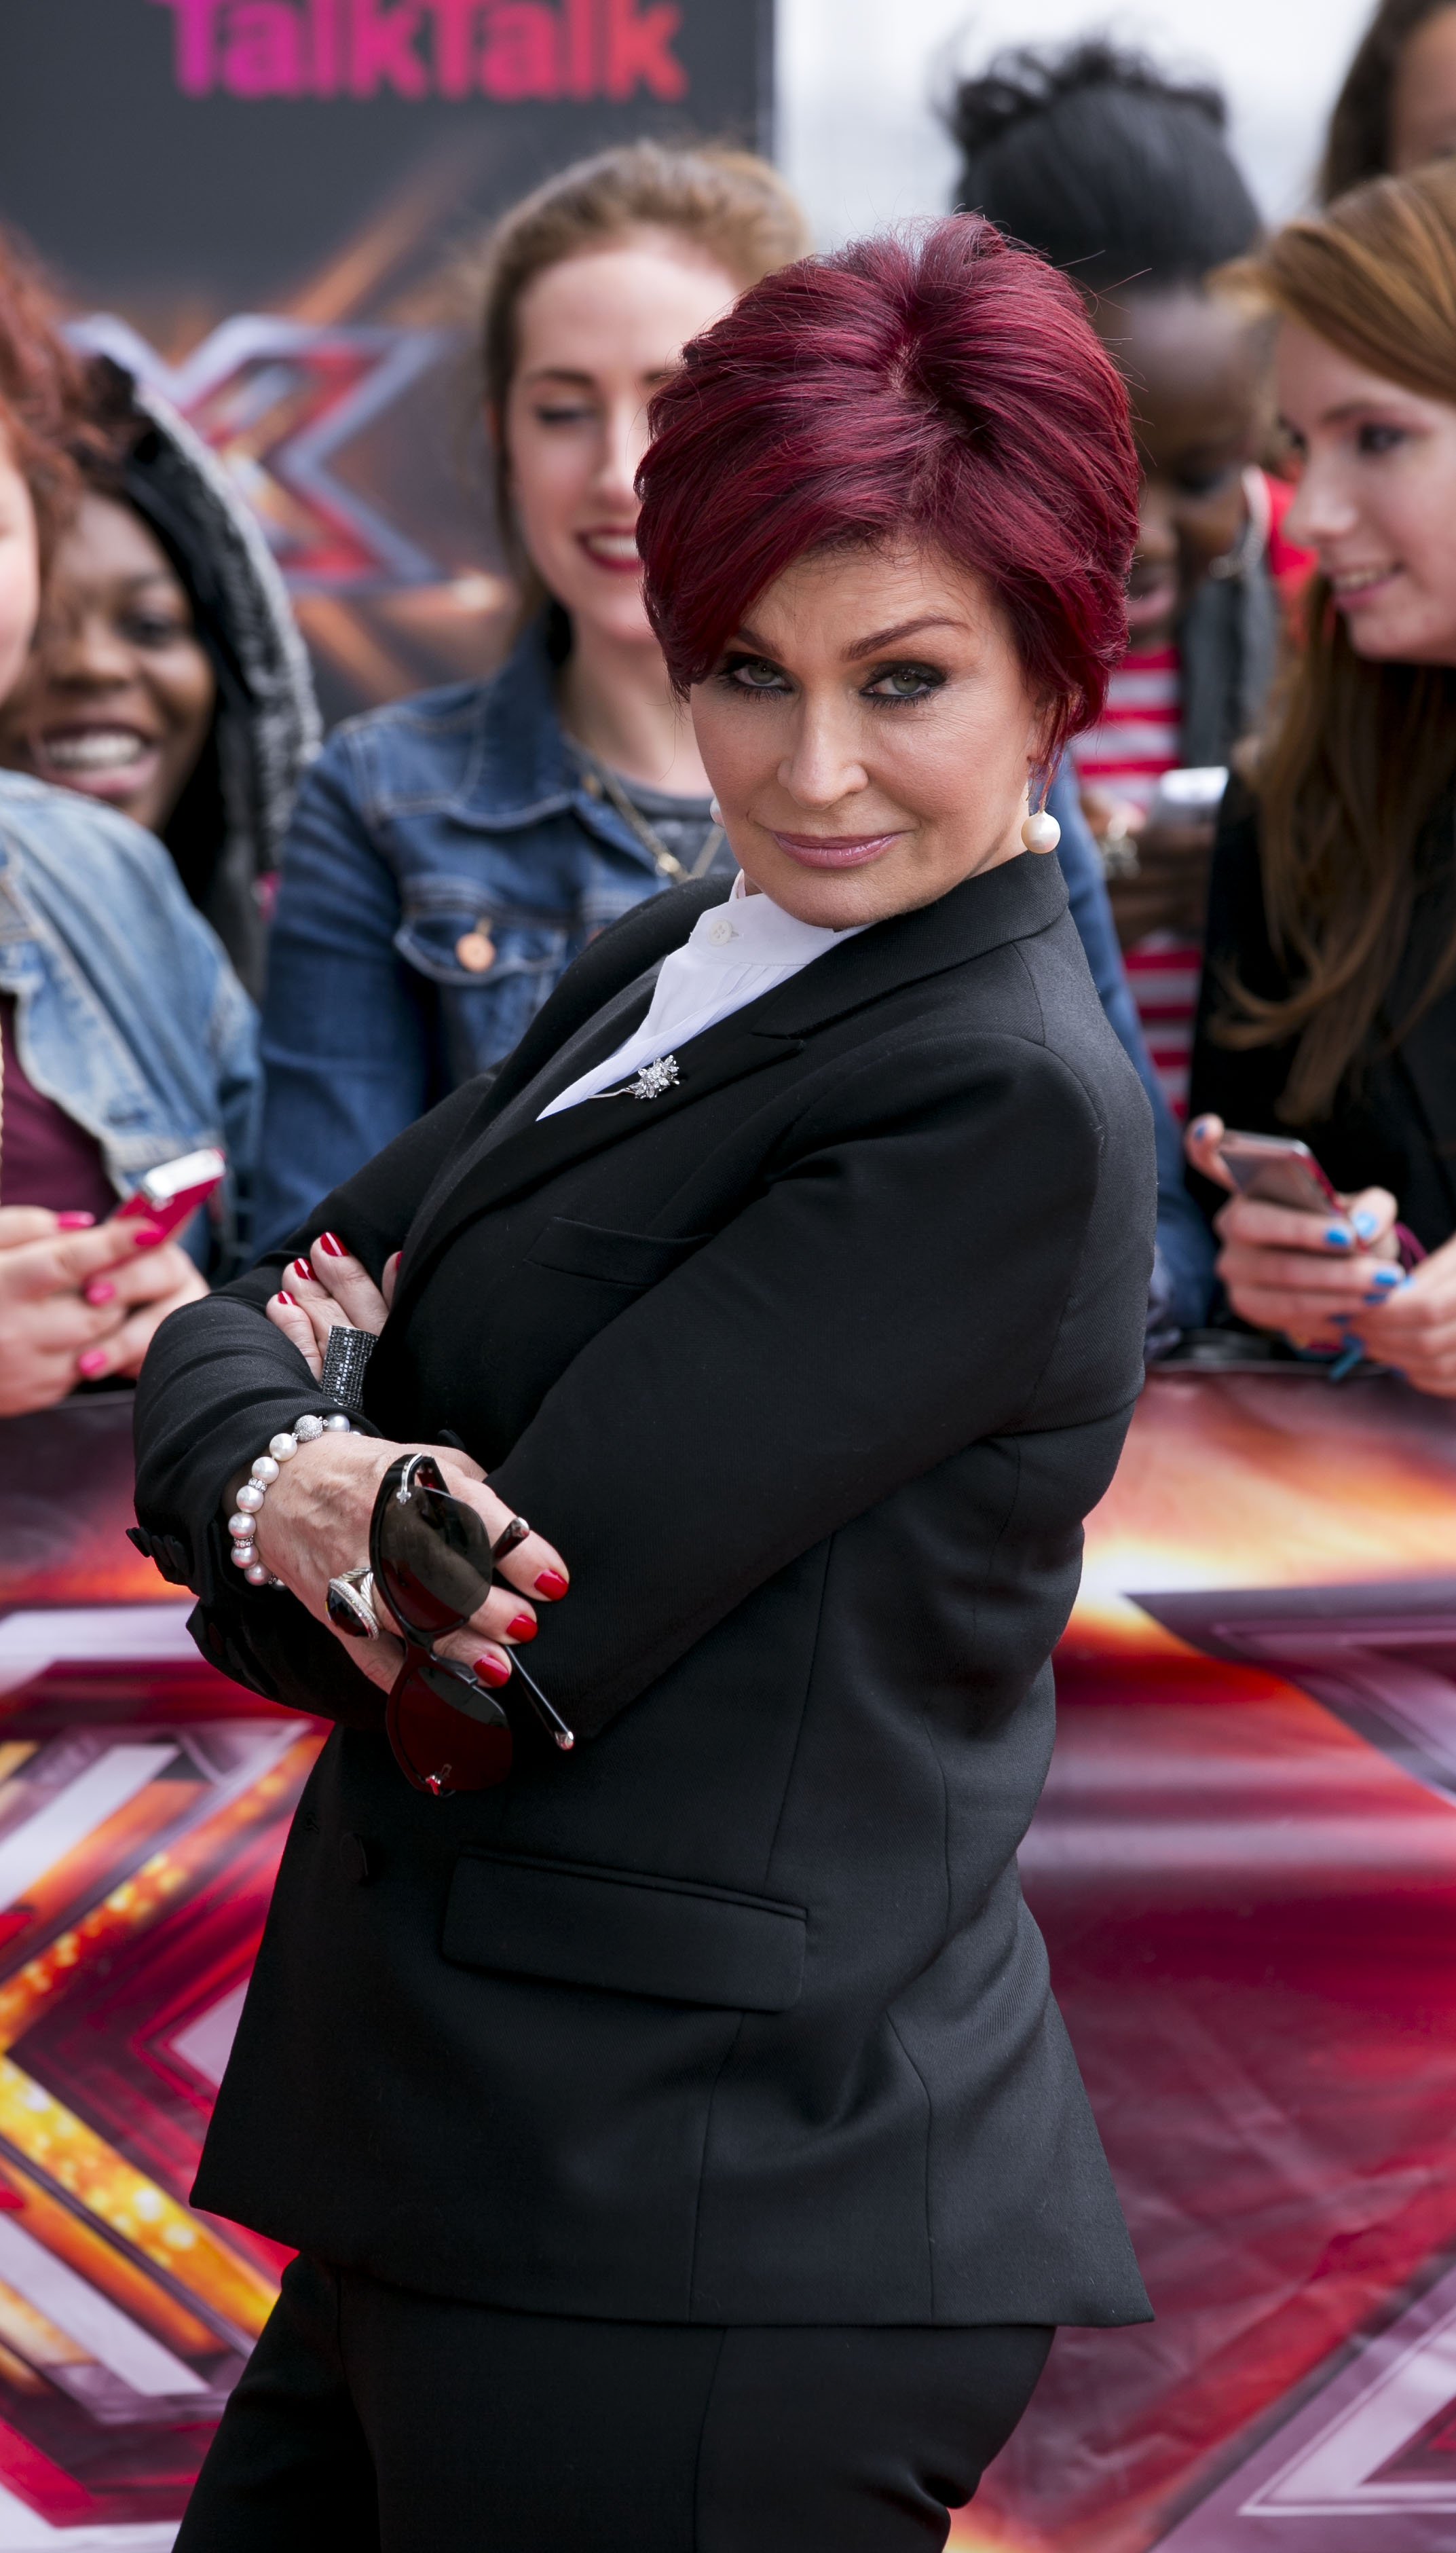 Sharon Osbourne at the London auditions of 'The X Factor' at ExCel on June 19, 2013. | Photo: GettyImages